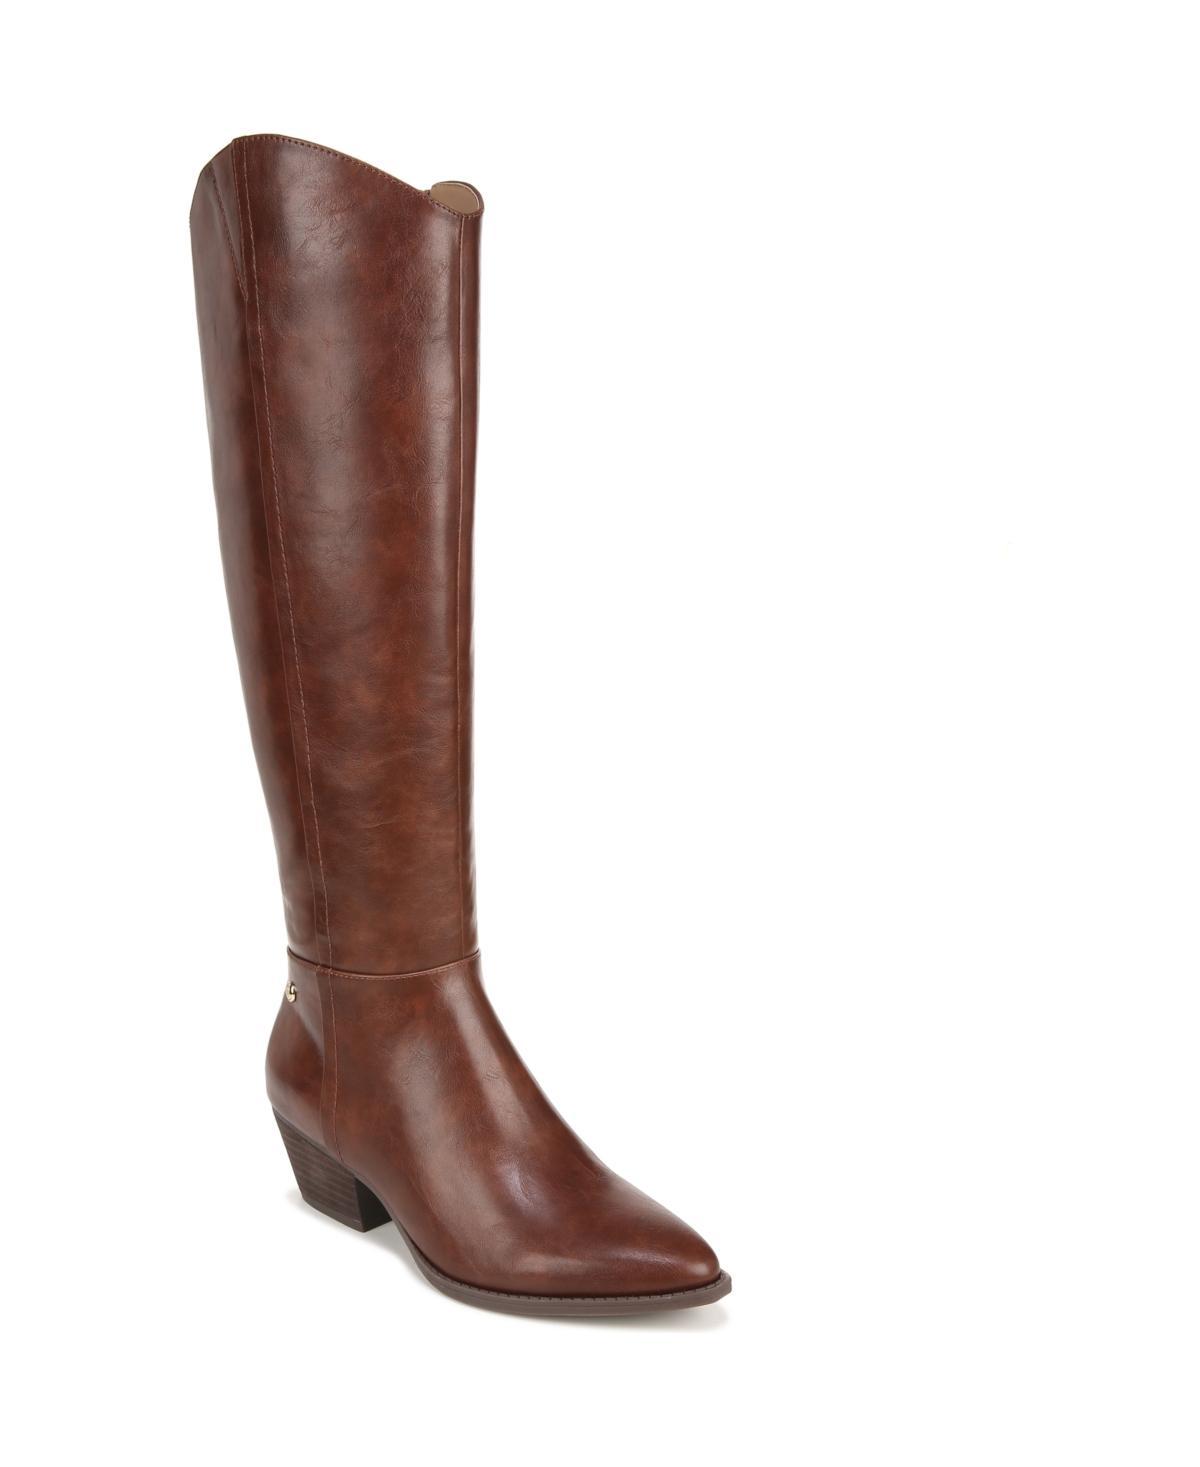 LifeStride Reese Knee High Boot Product Image